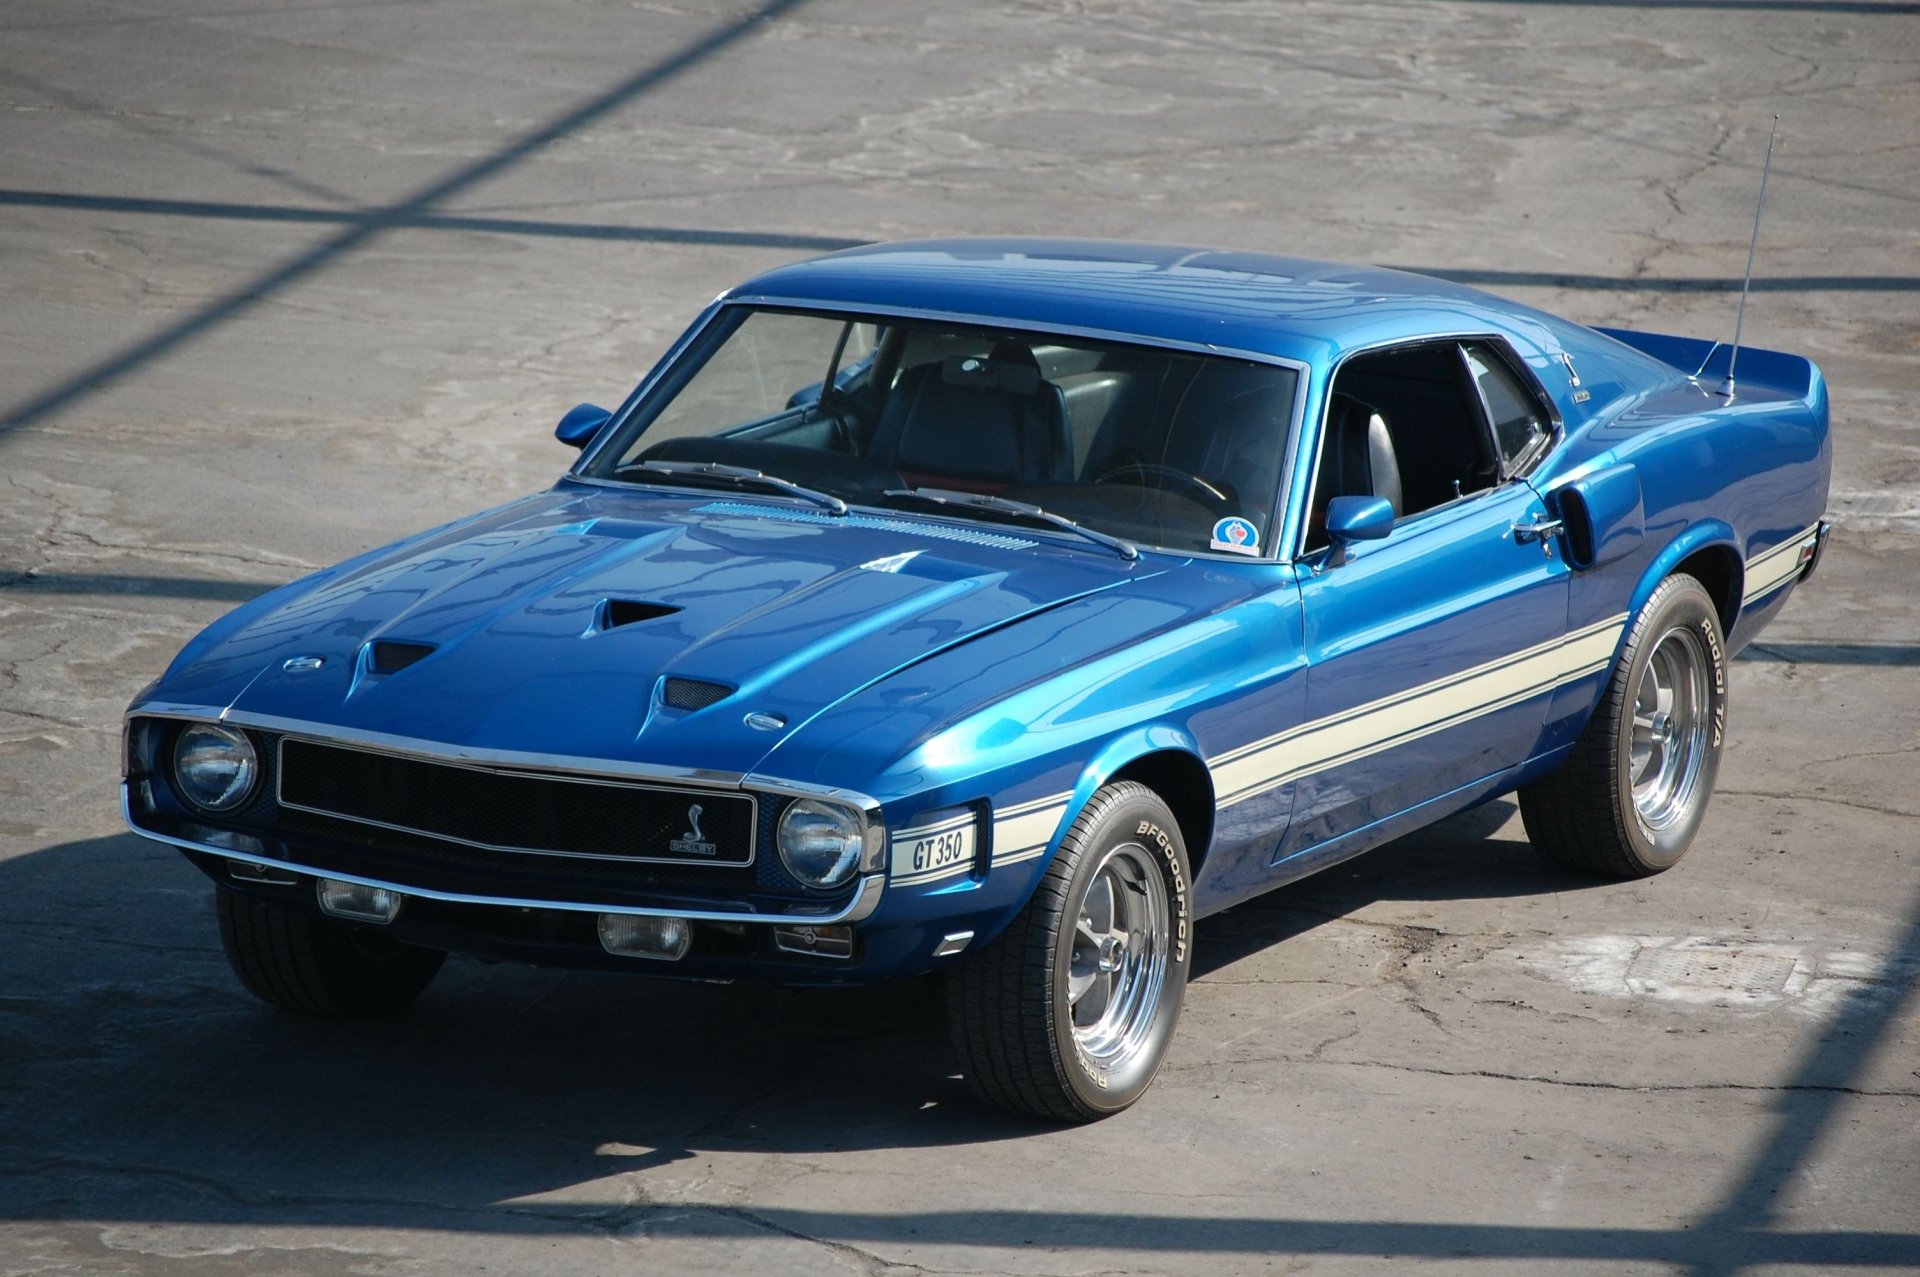 1969 Ford Shelby GT350